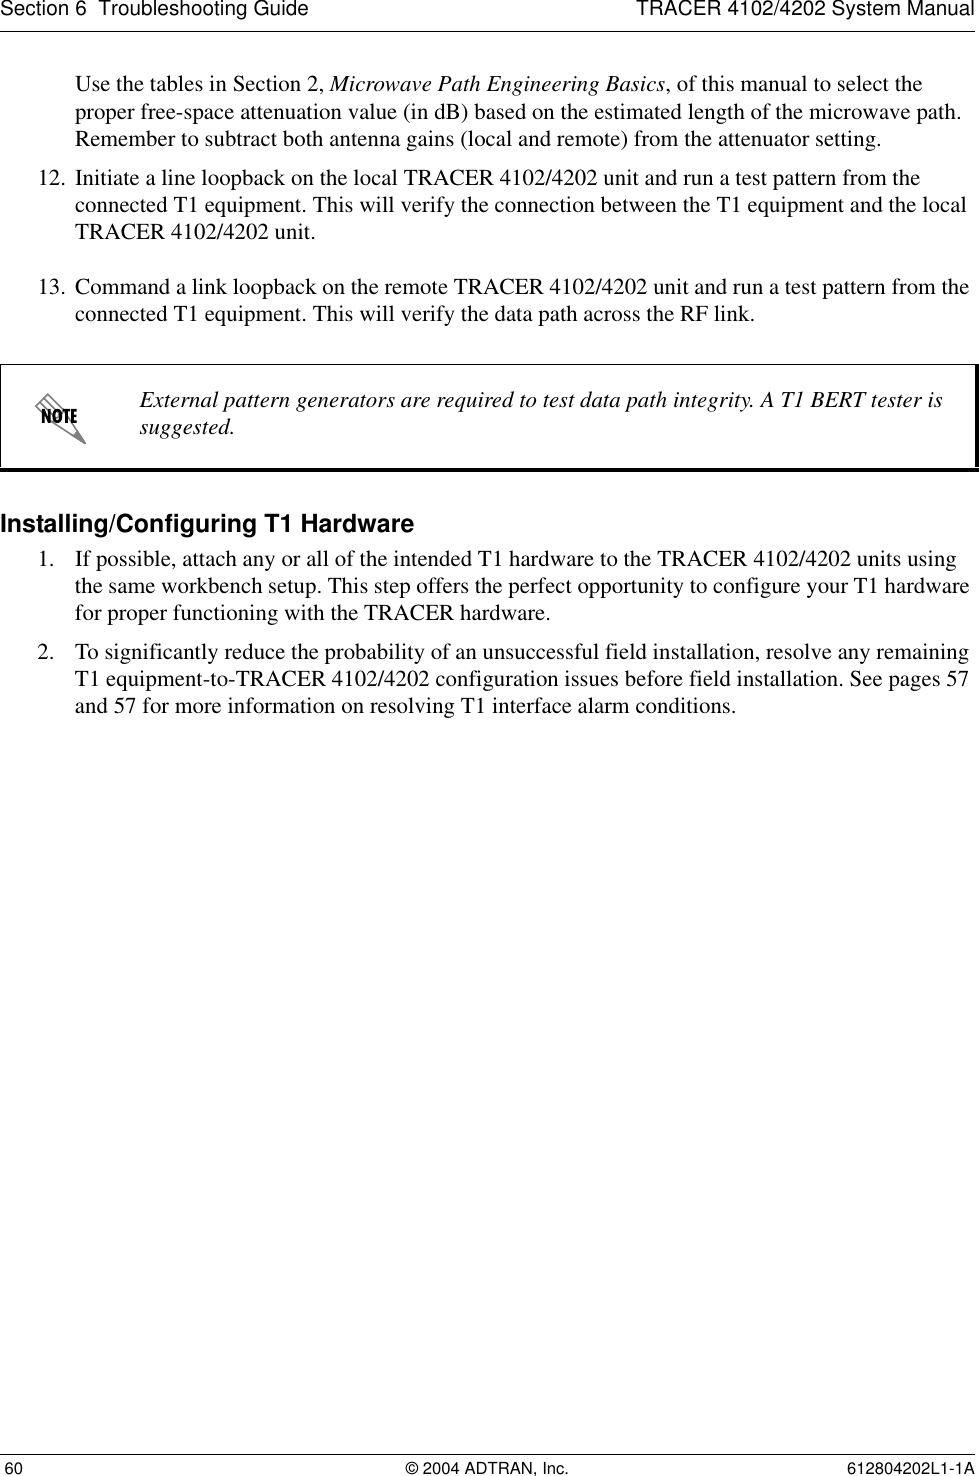 Section 6  Troubleshooting Guide TRACER 4102/4202 System Manual 60 © 2004 ADTRAN, Inc. 612804202L1-1AUse the tables in Section 2, Microwave Path Engineering Basics, of this manual to select the proper free-space attenuation value (in dB) based on the estimated length of the microwave path. Remember to subtract both antenna gains (local and remote) from the attenuator setting.12. Initiate a line loopback on the local TRACER 4102/4202 unit and run a test pattern from the connected T1 equipment. This will verify the connection between the T1 equipment and the local TRACER 4102/4202 unit.13. Command a link loopback on the remote TRACER 4102/4202 unit and run a test pattern from the connected T1 equipment. This will verify the data path across the RF link. Installing/Configuring T1 Hardware1. If possible, attach any or all of the intended T1 hardware to the TRACER 4102/4202 units using the same workbench setup. This step offers the perfect opportunity to configure your T1 hardware for proper functioning with the TRACER hardware.2. To significantly reduce the probability of an unsuccessful field installation, resolve any remaining T1 equipment-to-TRACER 4102/4202 configuration issues before field installation. See pages 57 and 57 for more information on resolving T1 interface alarm conditions.External pattern generators are required to test data path integrity. A T1 BERT tester is suggested.